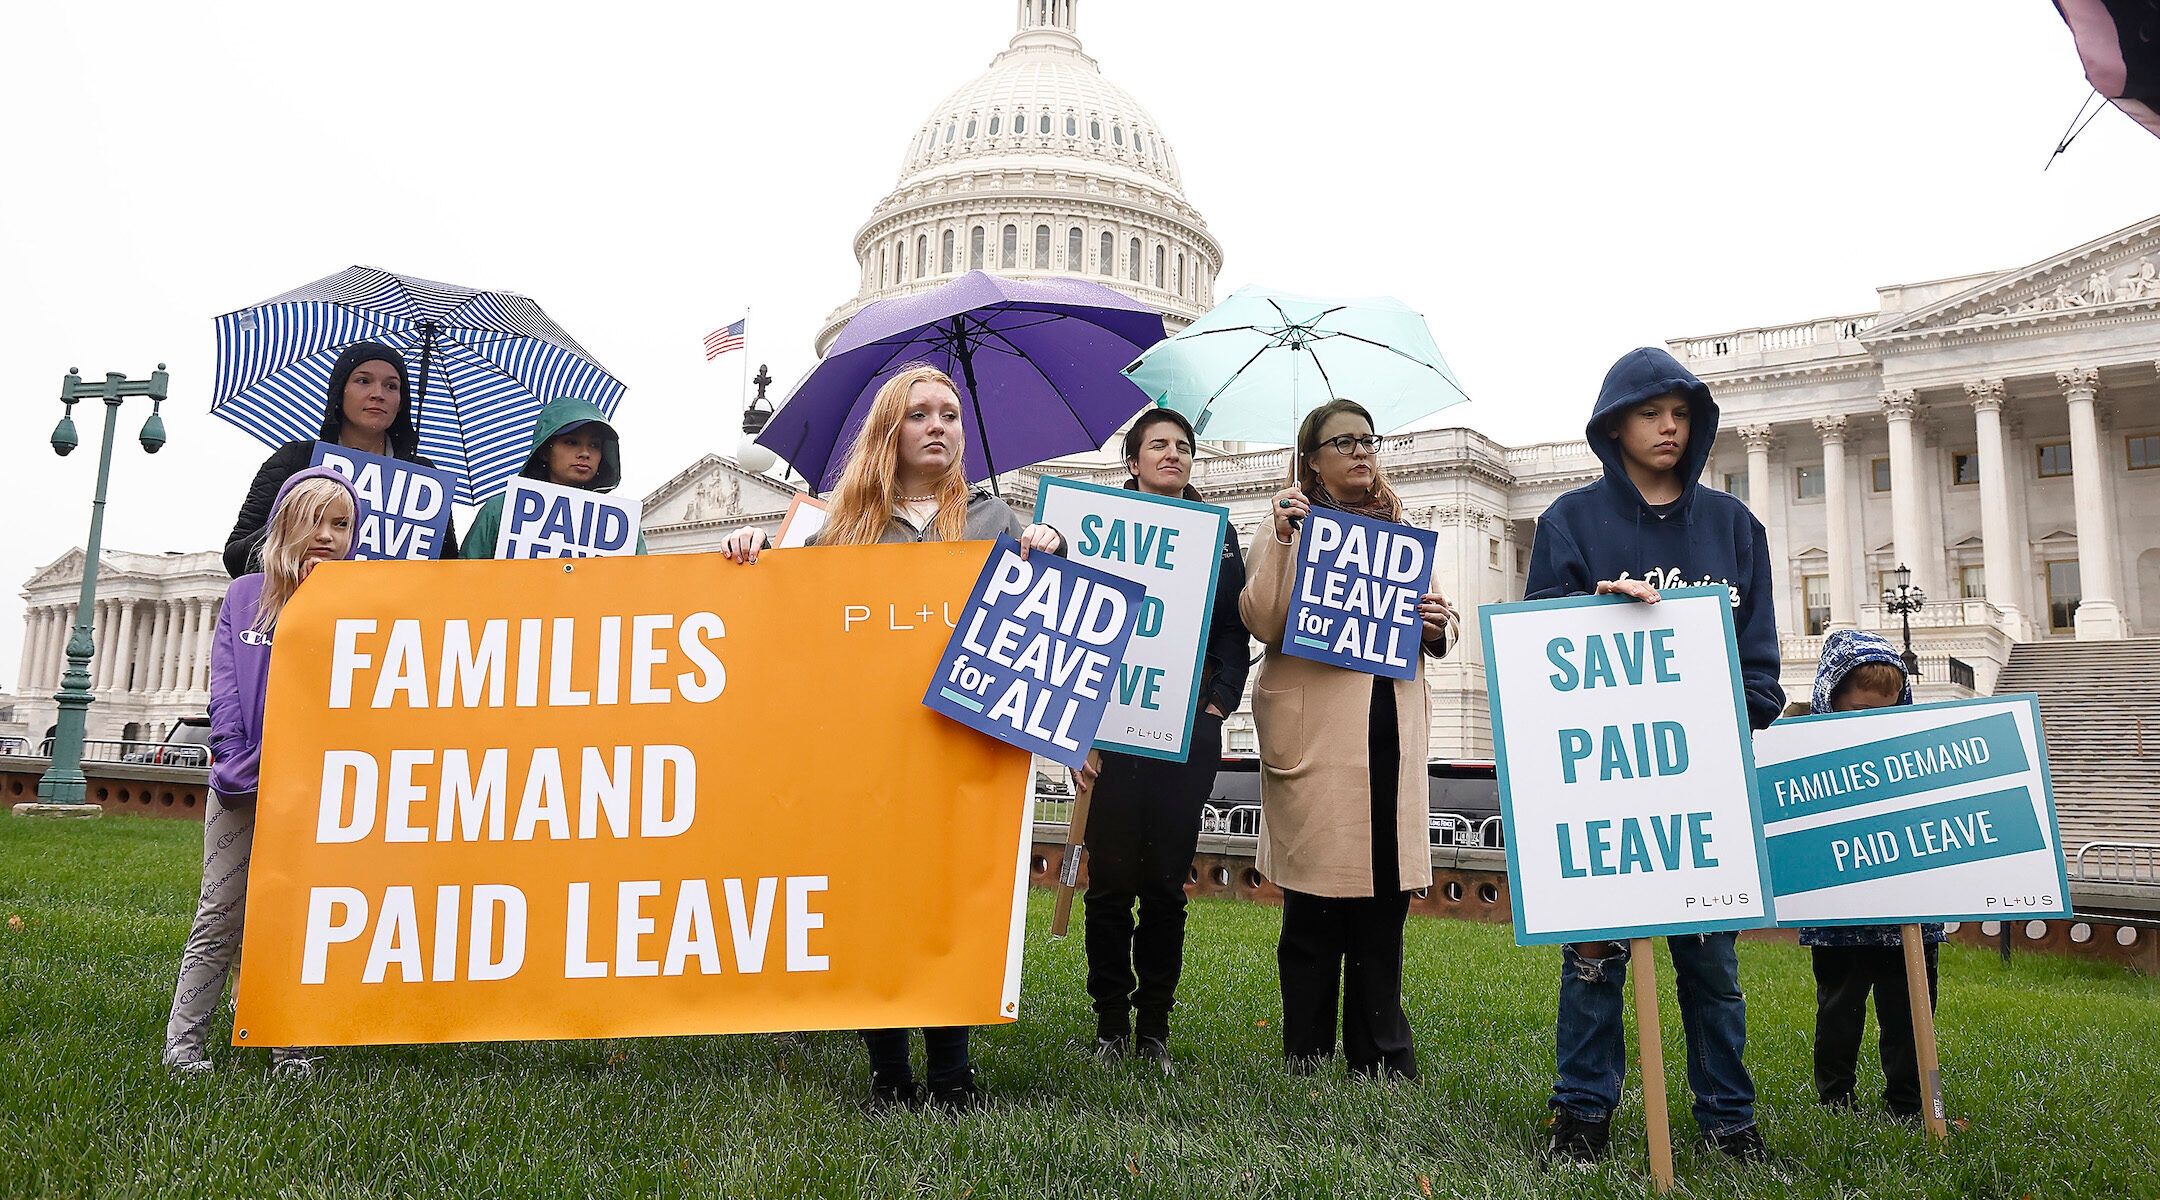 Paid Family Leave protest